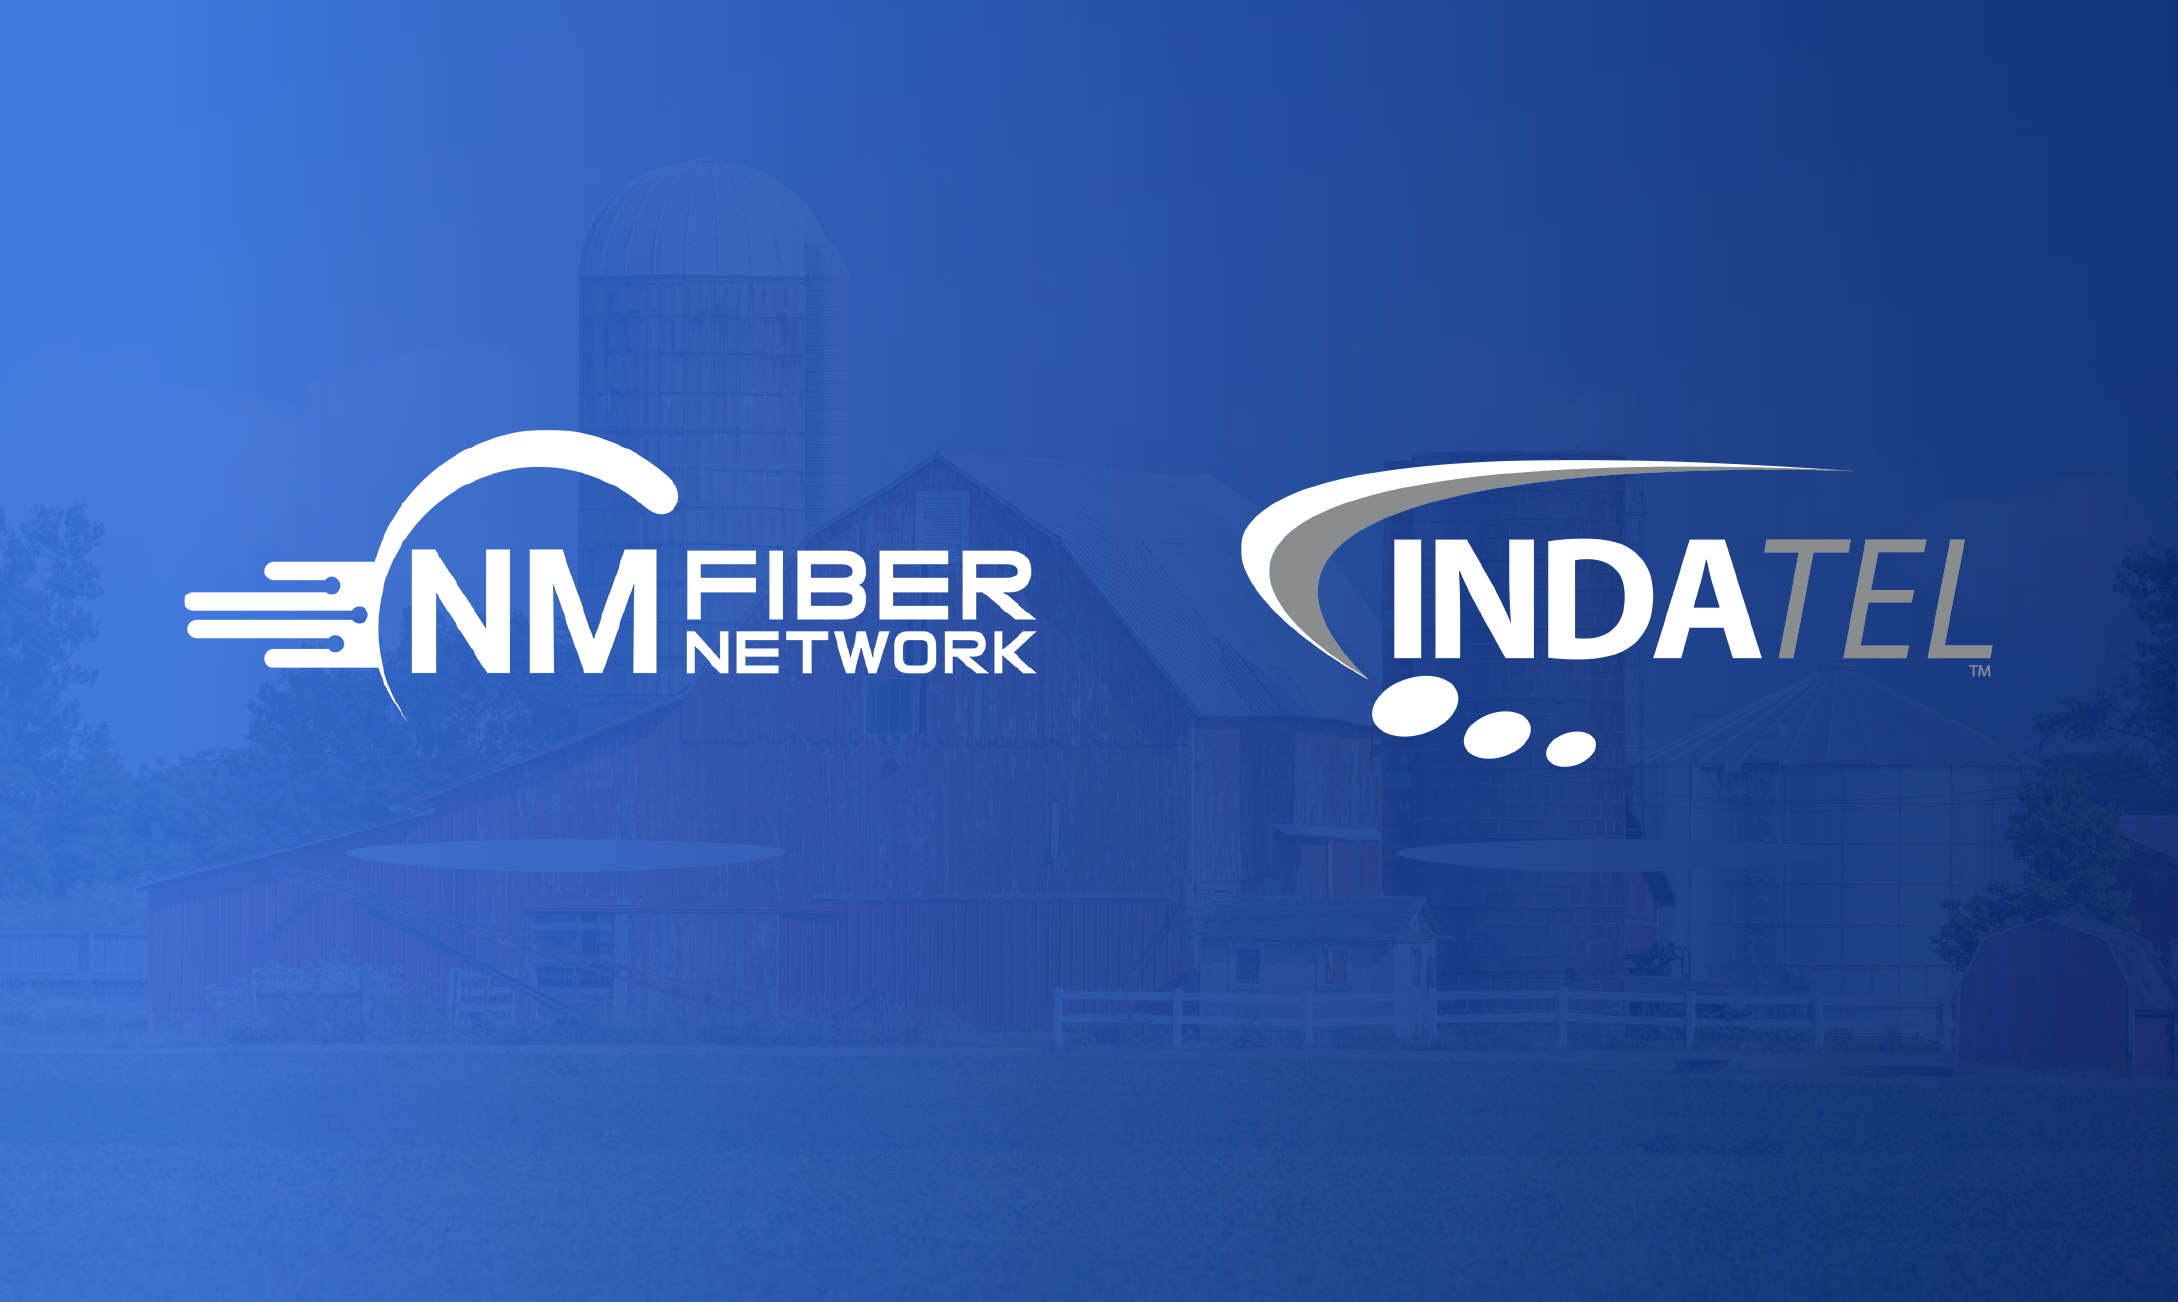 INDATEL Welcomes New Mexico Fiber Network as New Member image